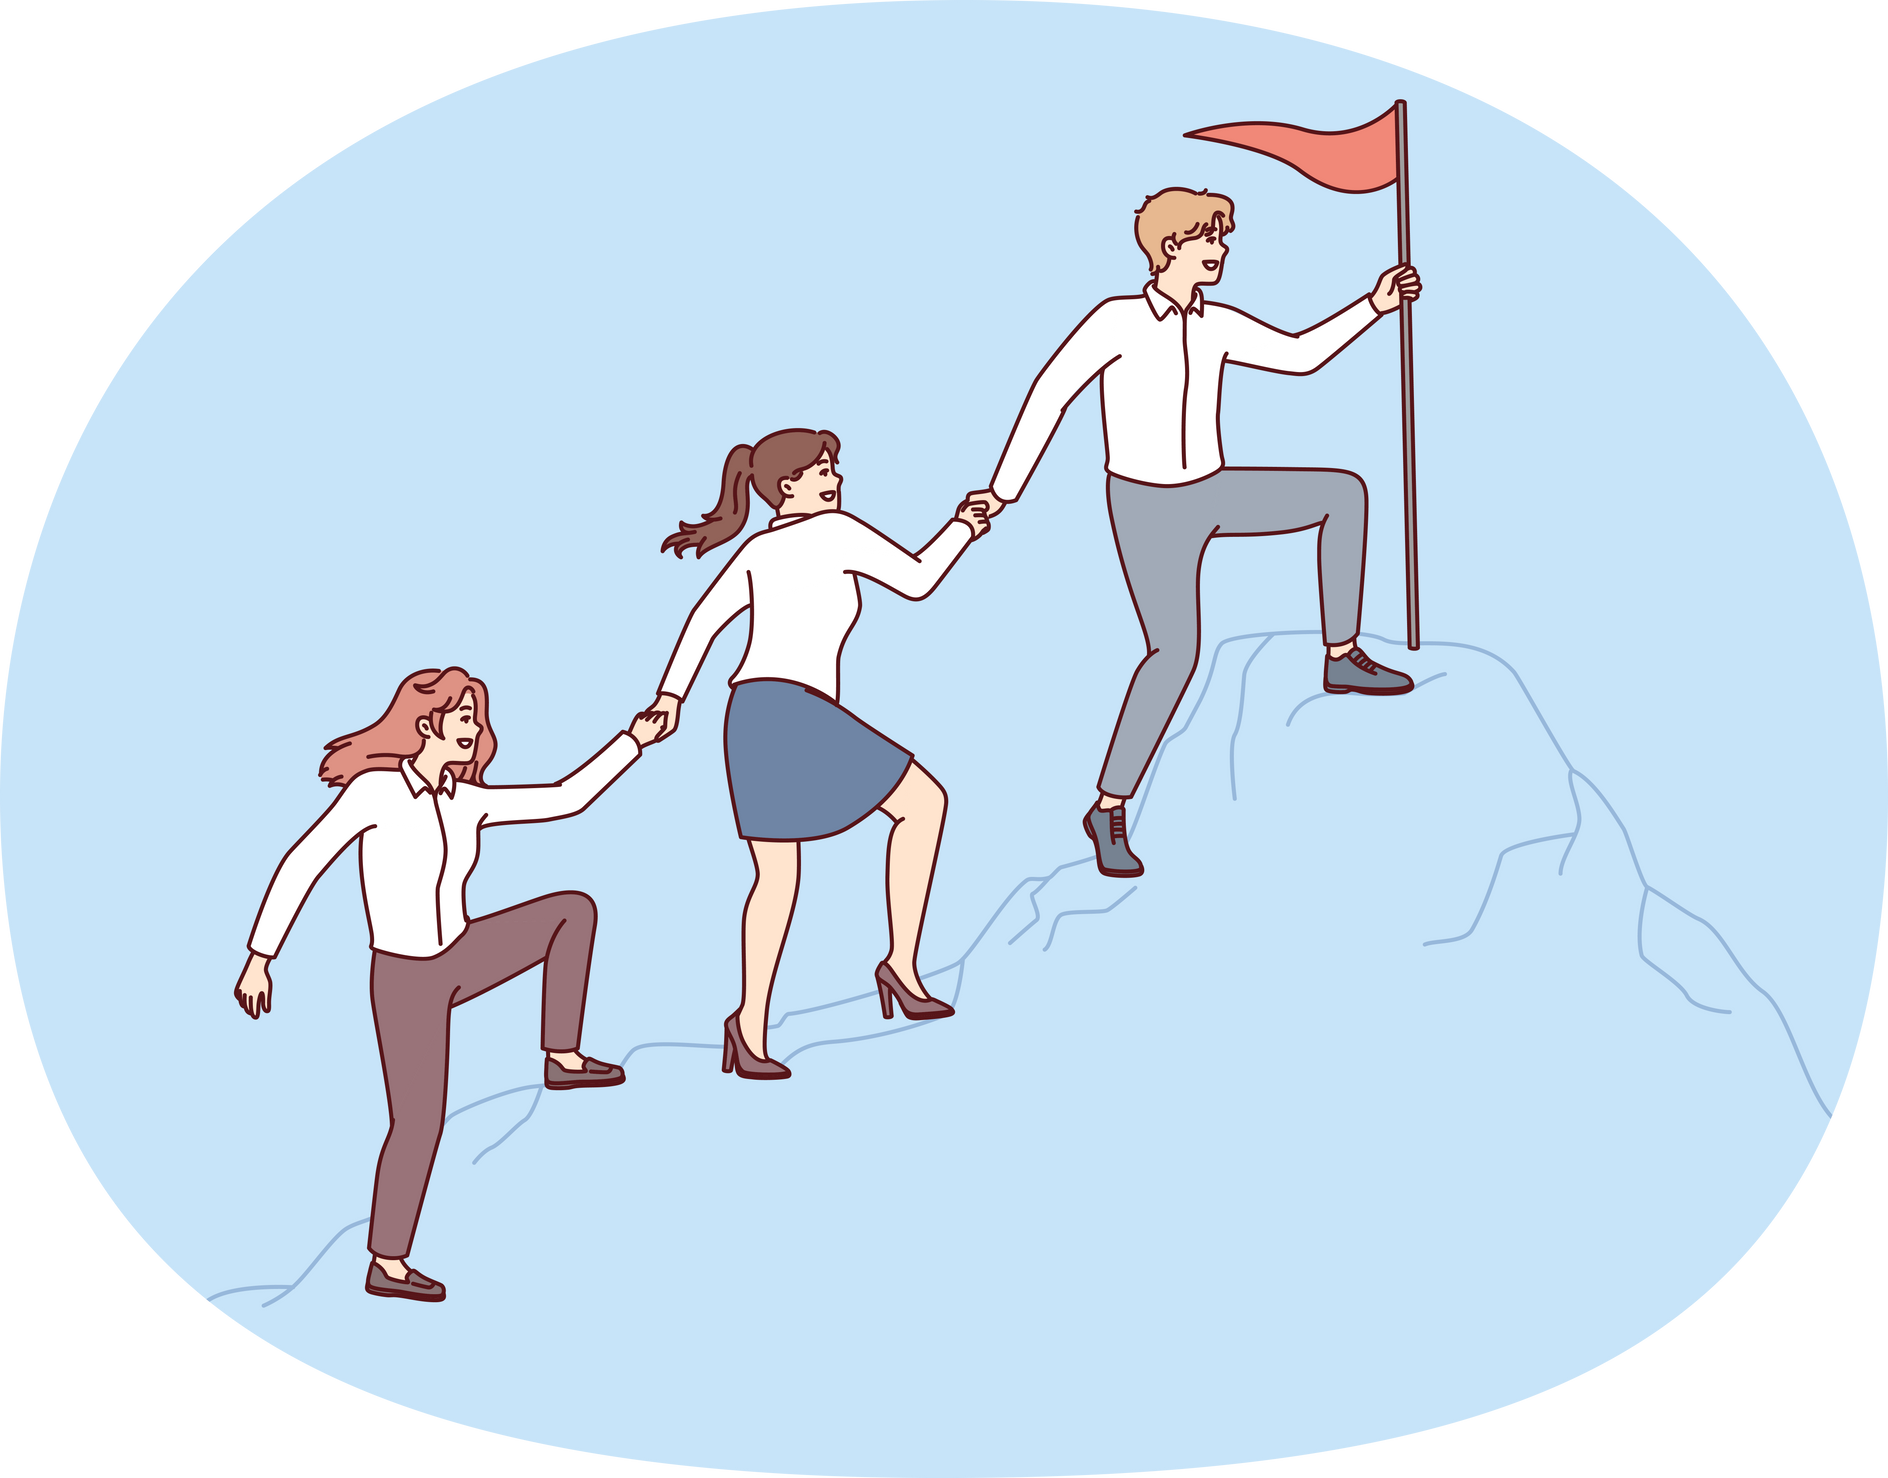 People in Business Attire Climb Mountain Holding Hands to Reach Flag at Top. Concept of Corporate Leadership and Success in Career Ladder with Active Interaction between Employees